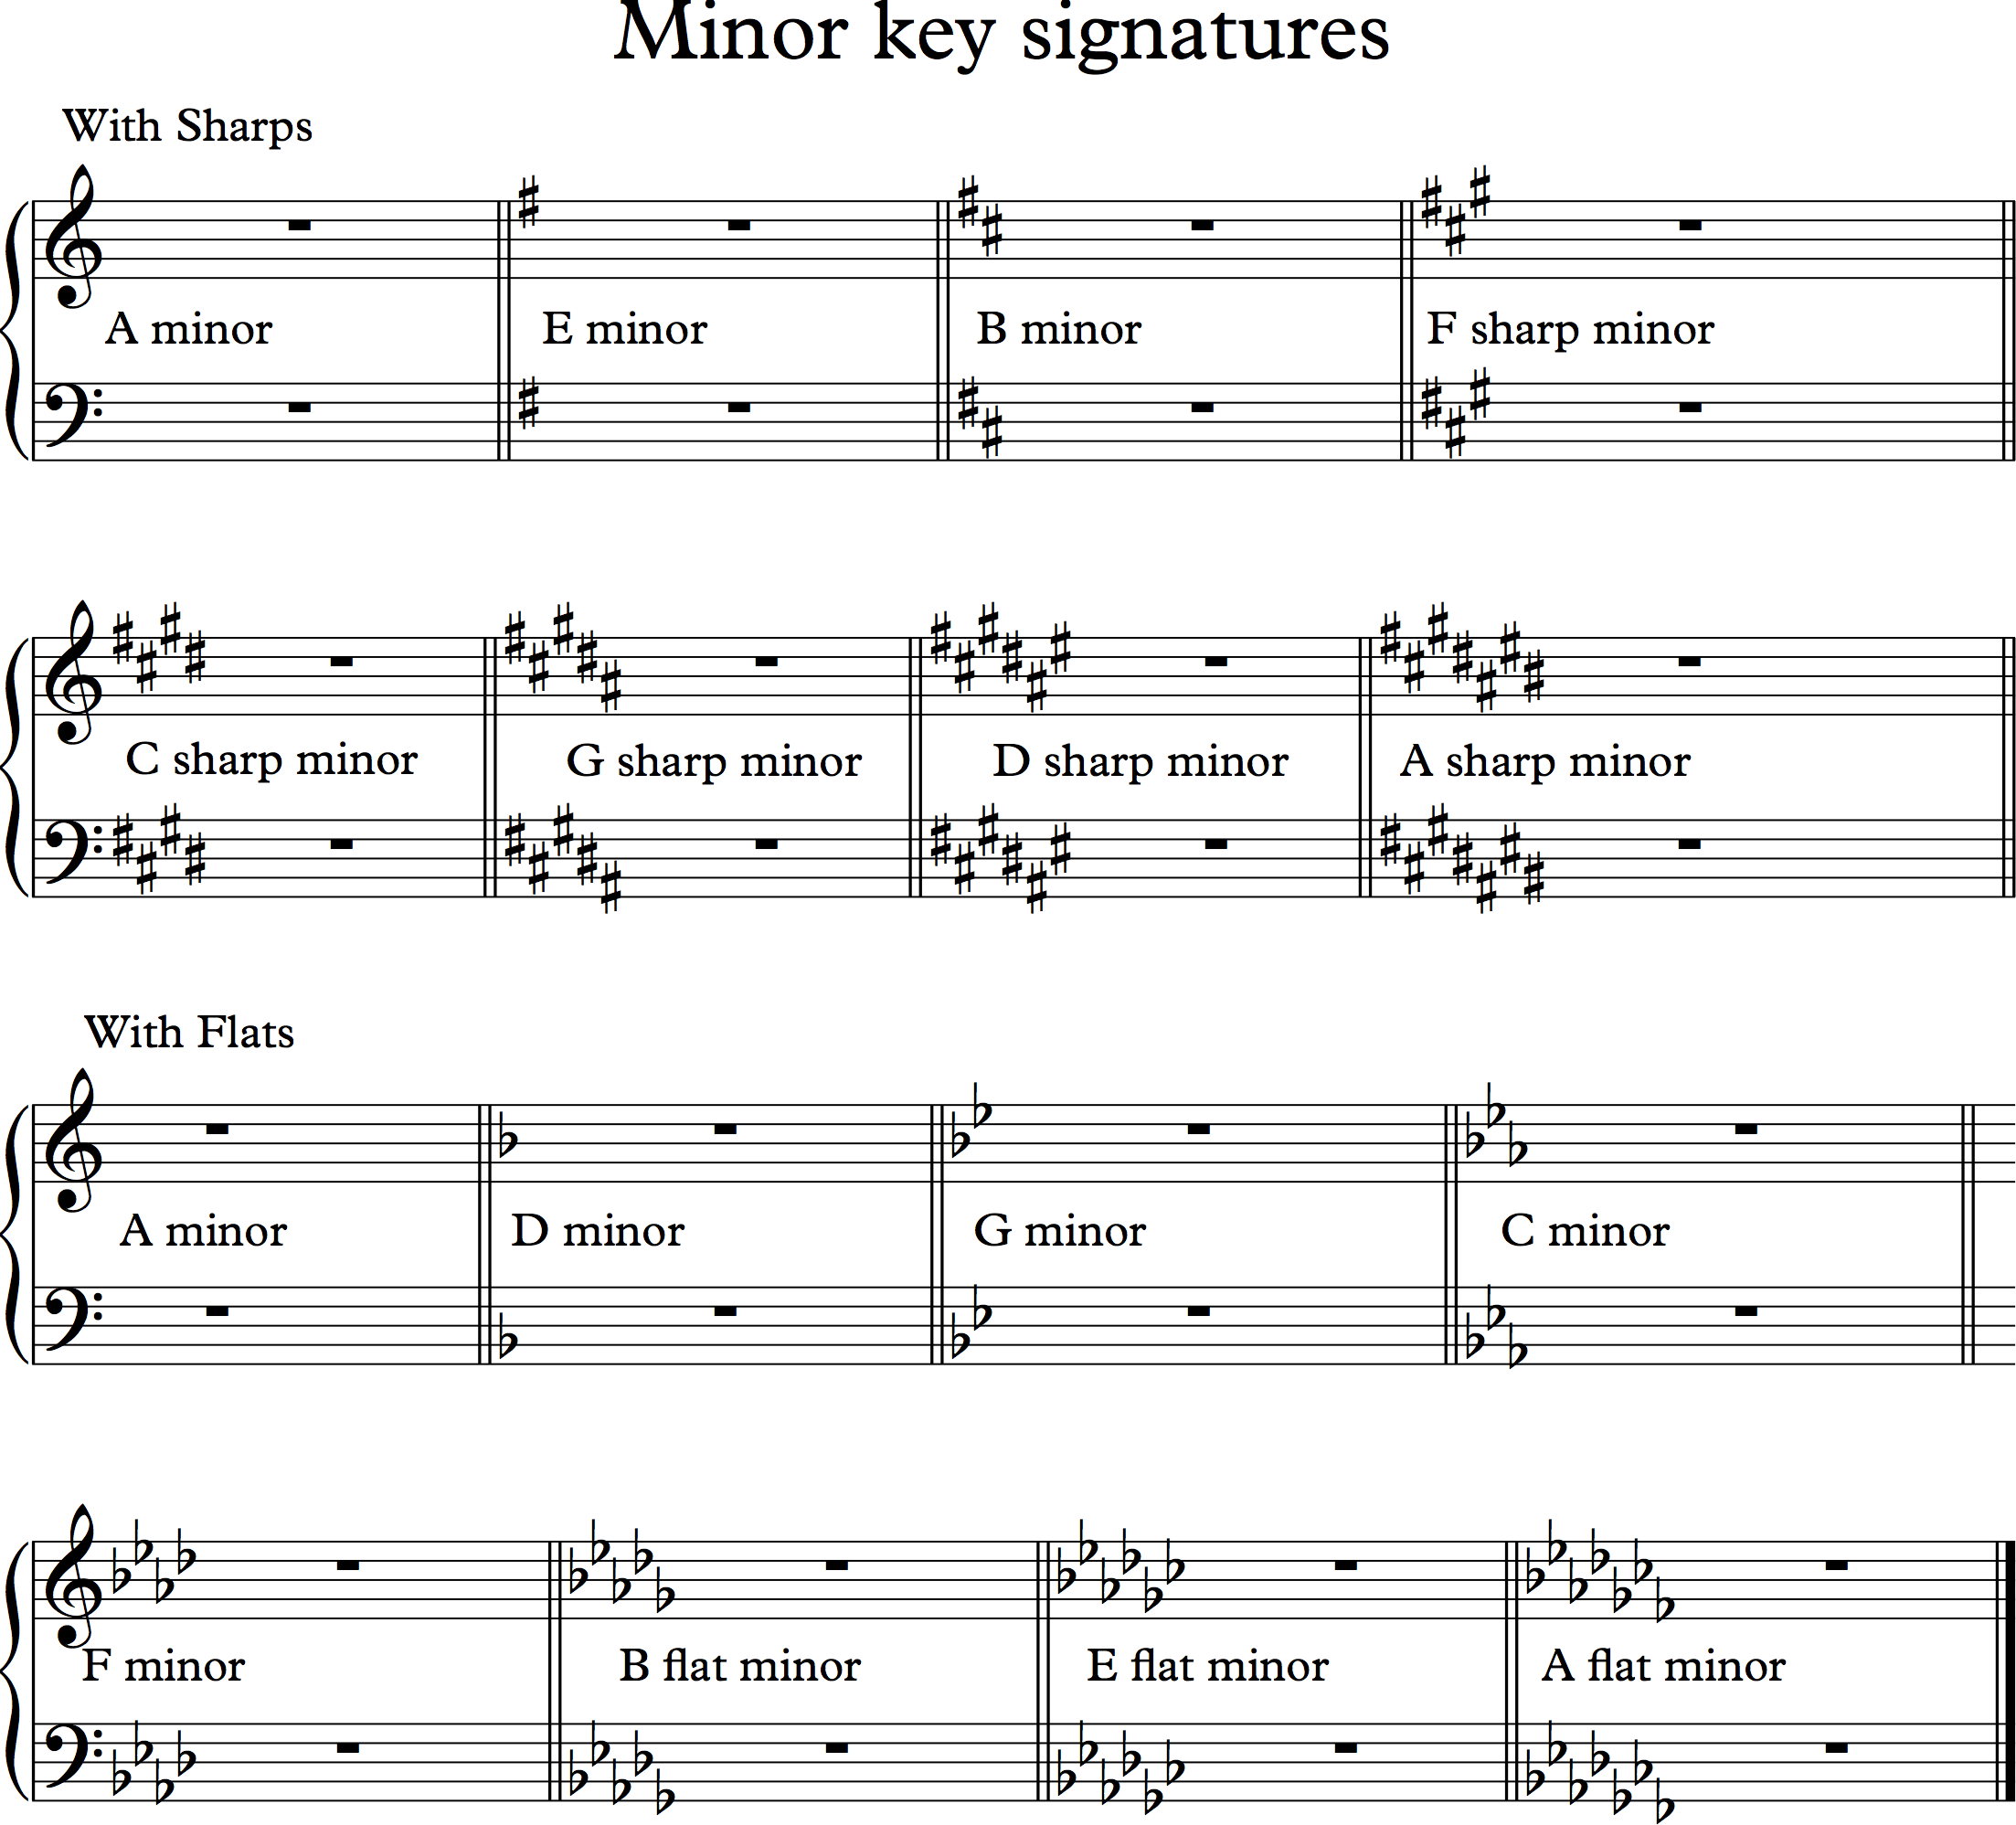 on what scale degree is b flat minor in the key of b flat